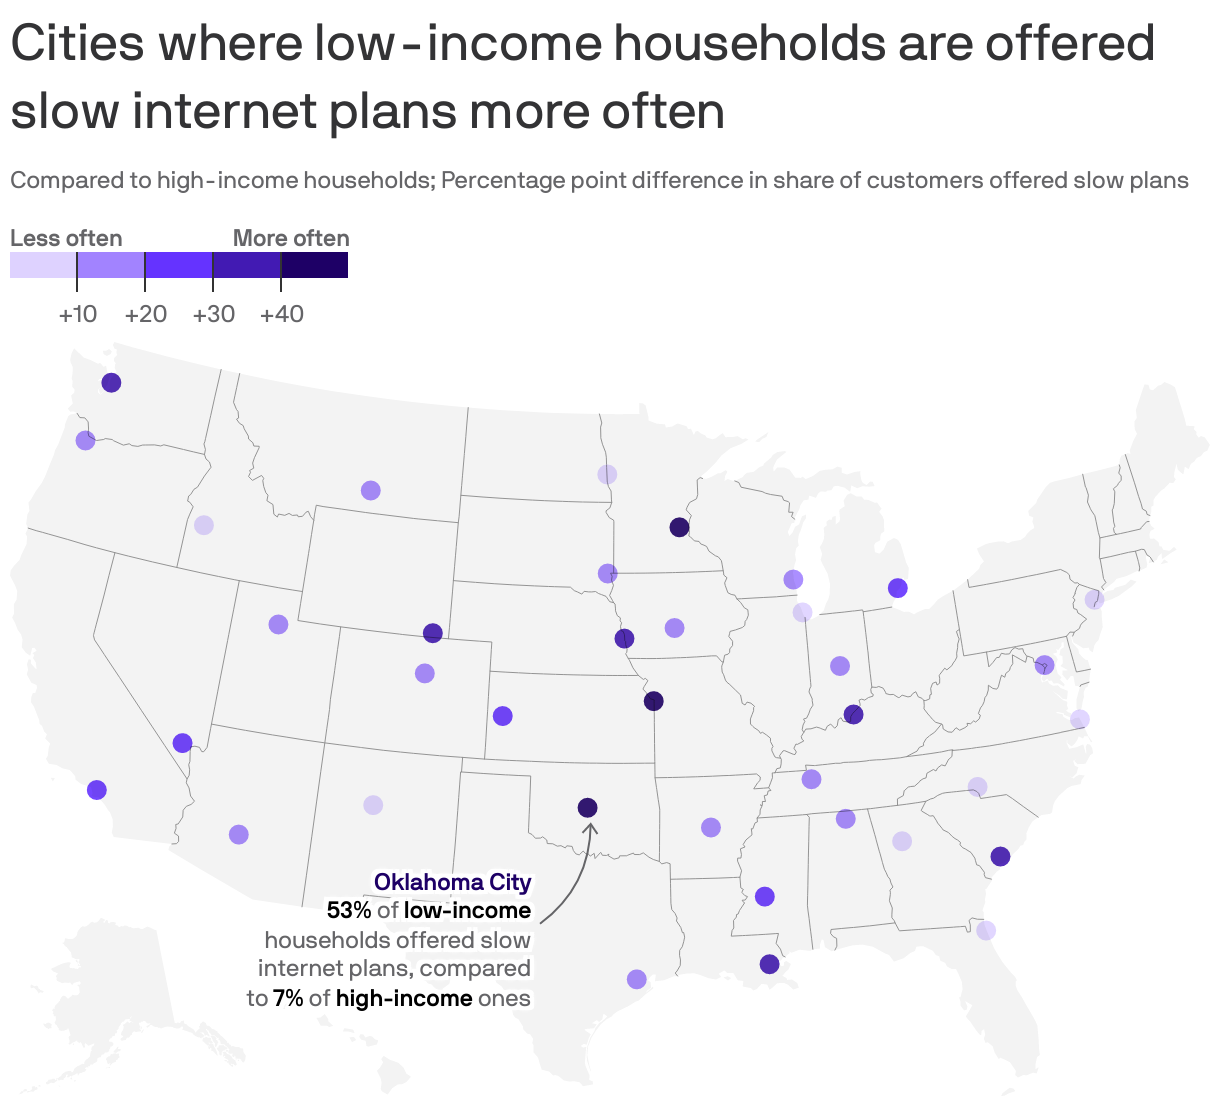 Cities where low-income households are offered slow internet plans more often